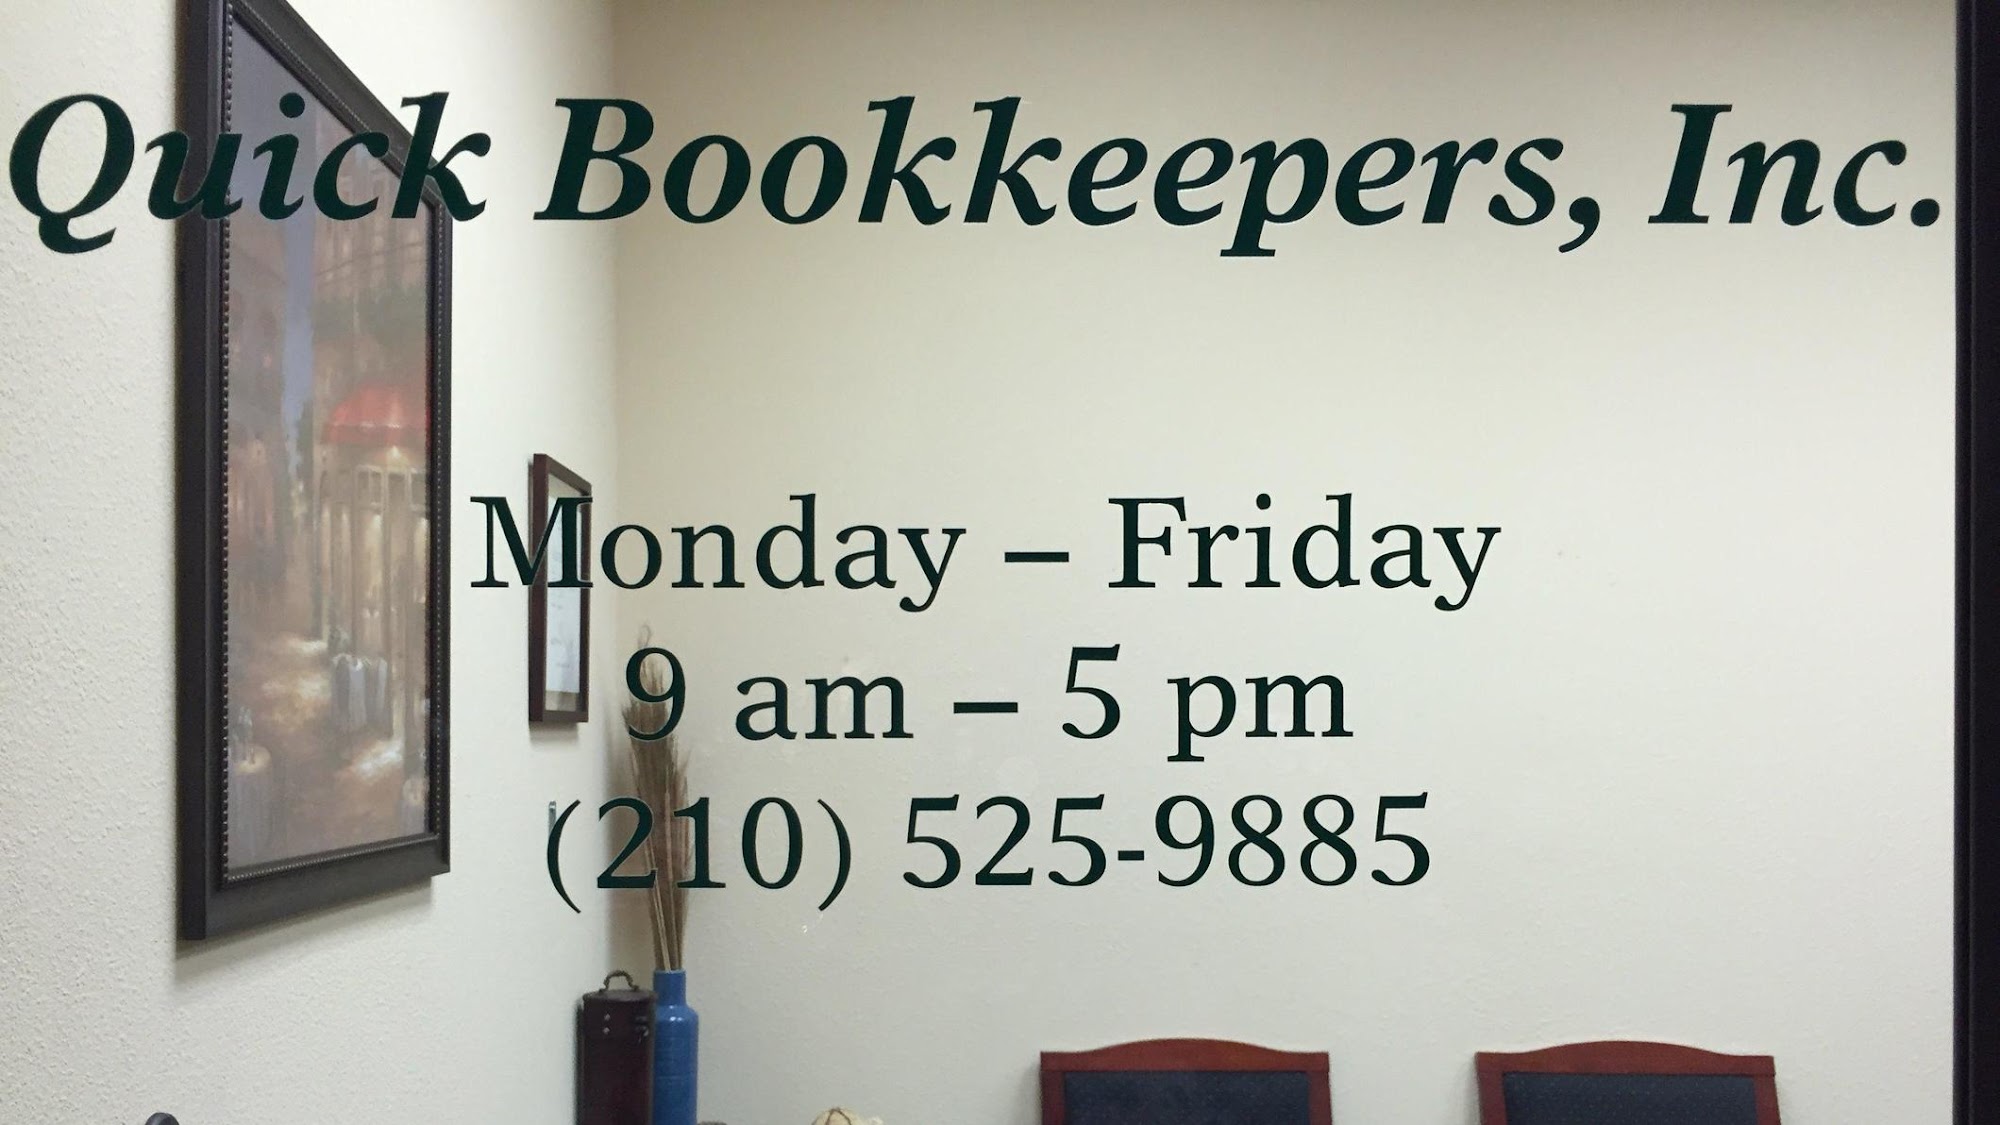 Quick Bookkeepers, Inc.